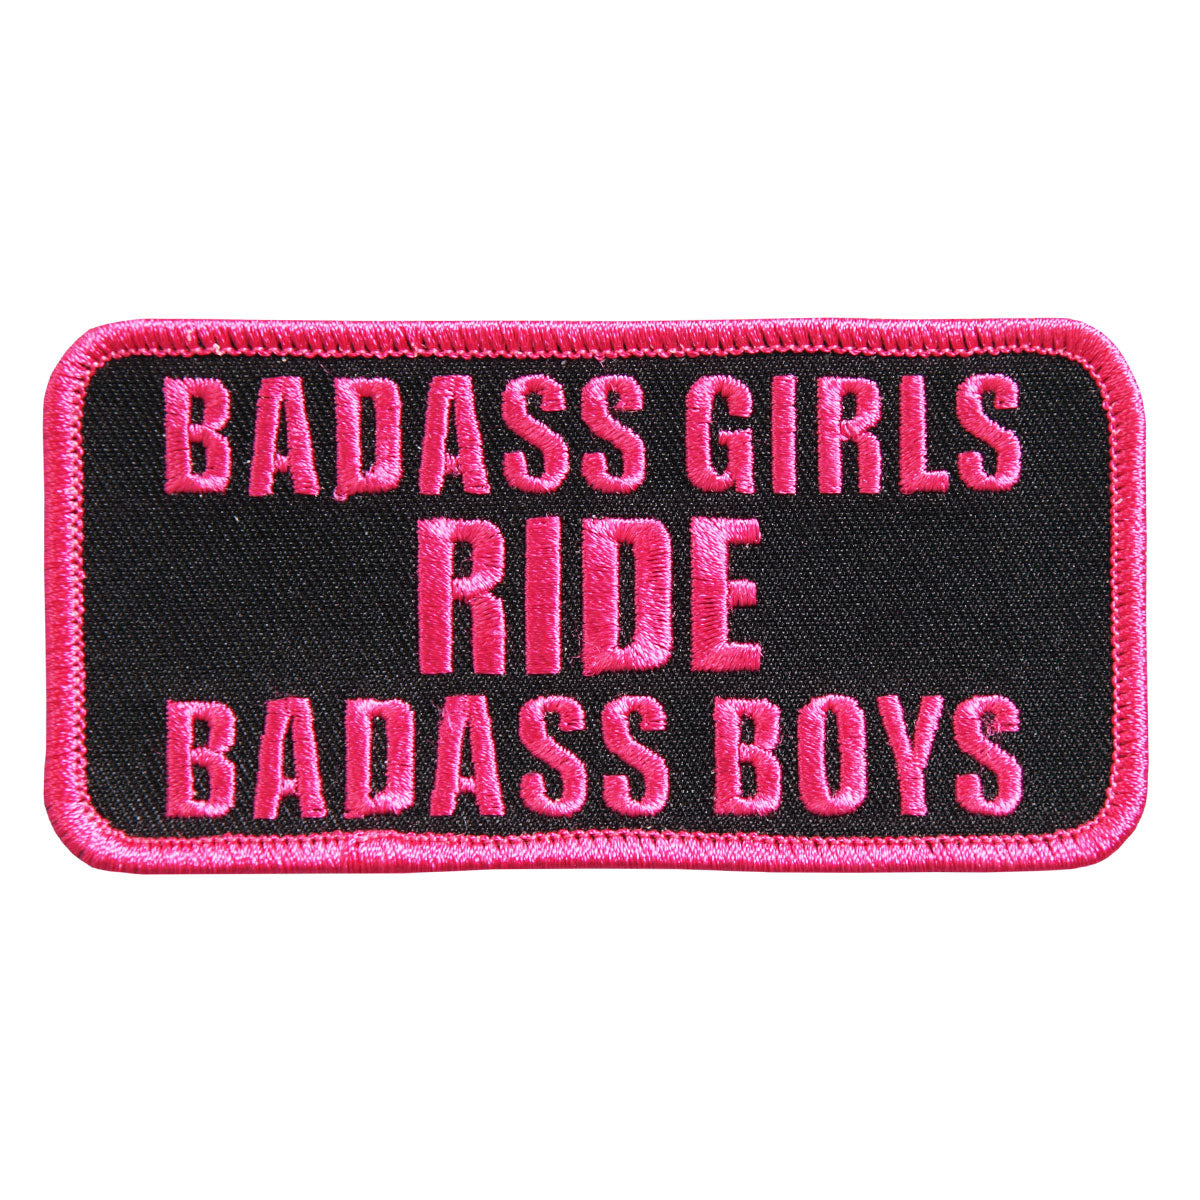 Hot Leathers Badass Girls Ride Embroidered 4" 4" x 2" Patch PPL9399